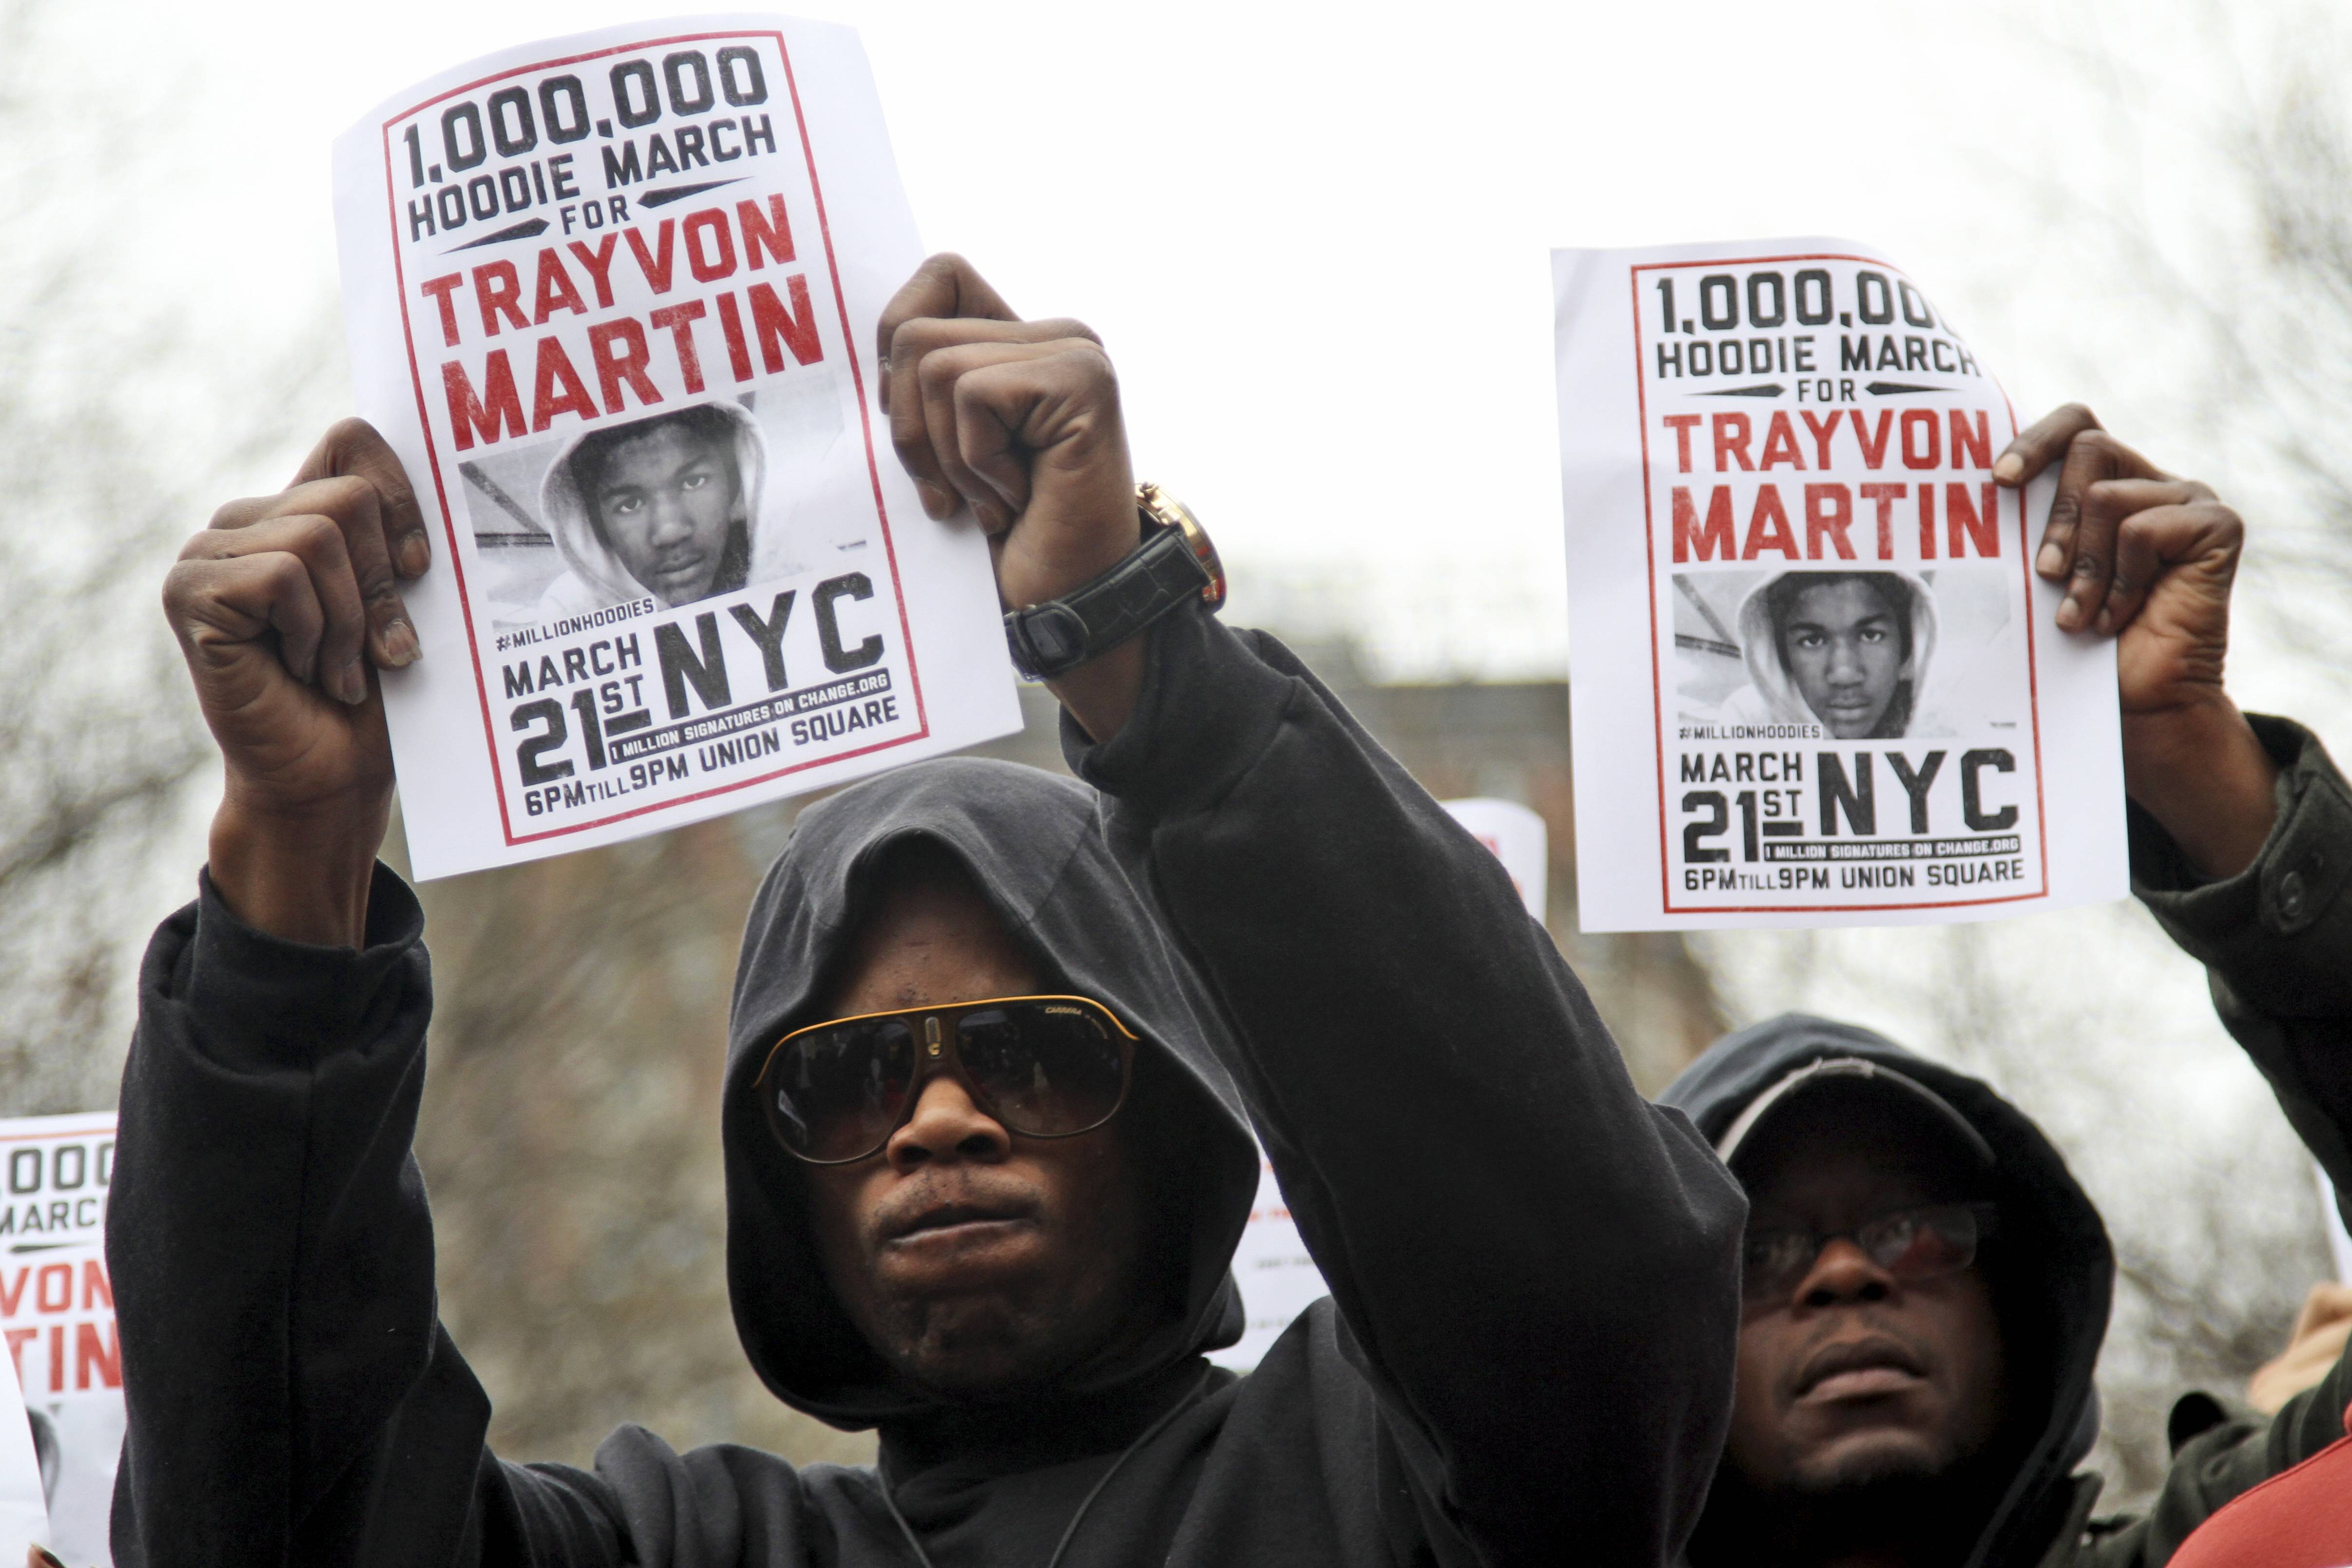 Marching for Justice - Thousands of New Yorkers donned hoodies Wednesday and marched in solidarity with Trayvon Martin in the Million Hoodie March in Manhattan. Trayvon was killed February 26 as he walked near his father's home in Sanford, FL. — Deborah Creighton Skinner(Photo: AP Photo/Mary Altaffer)